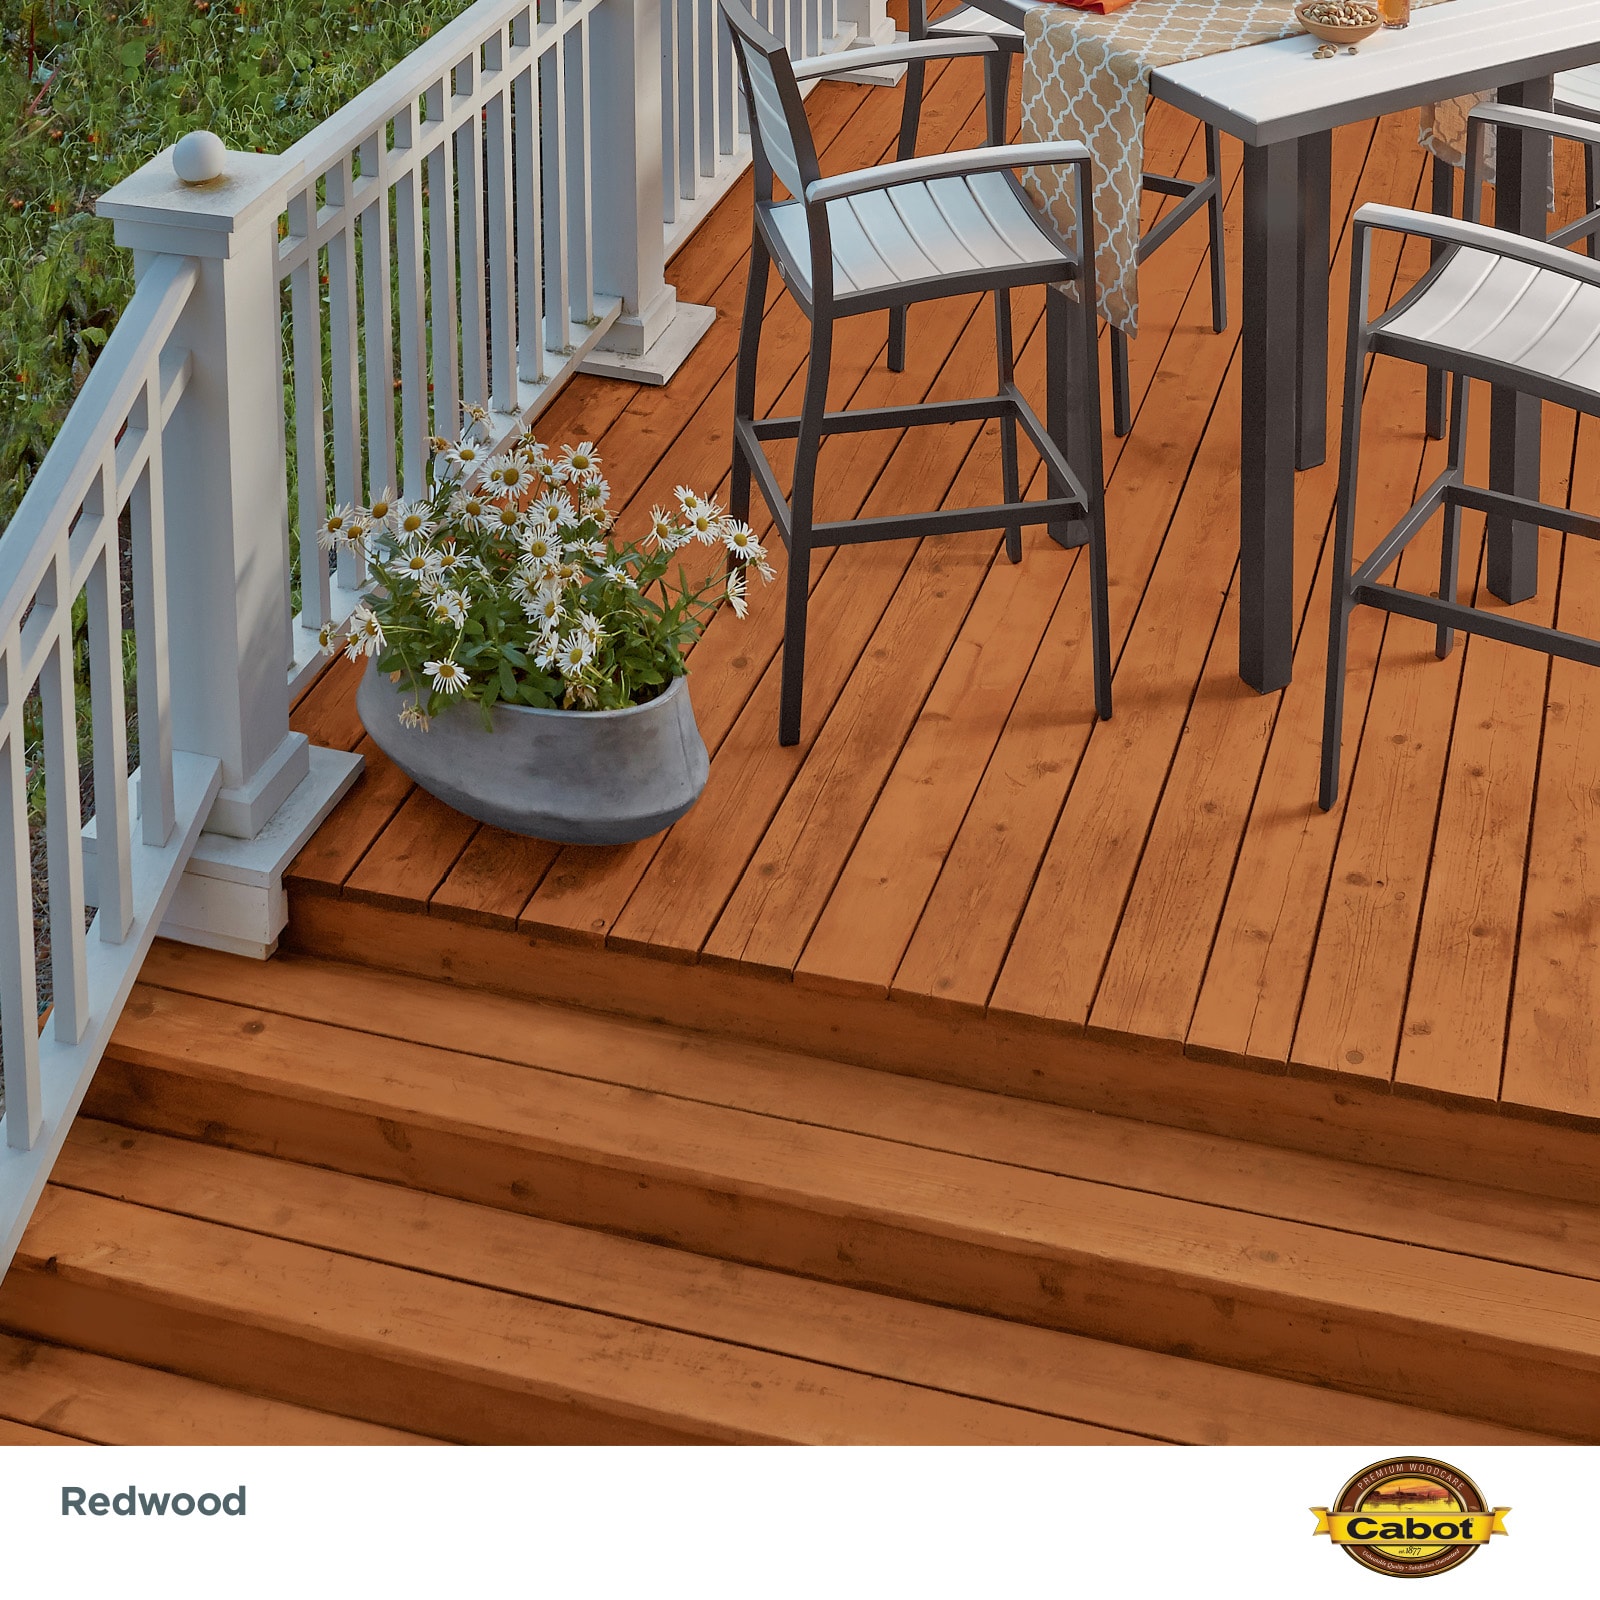 Cabot Redwood Semi-transparent Exterior Wood Stain and Sealer (1